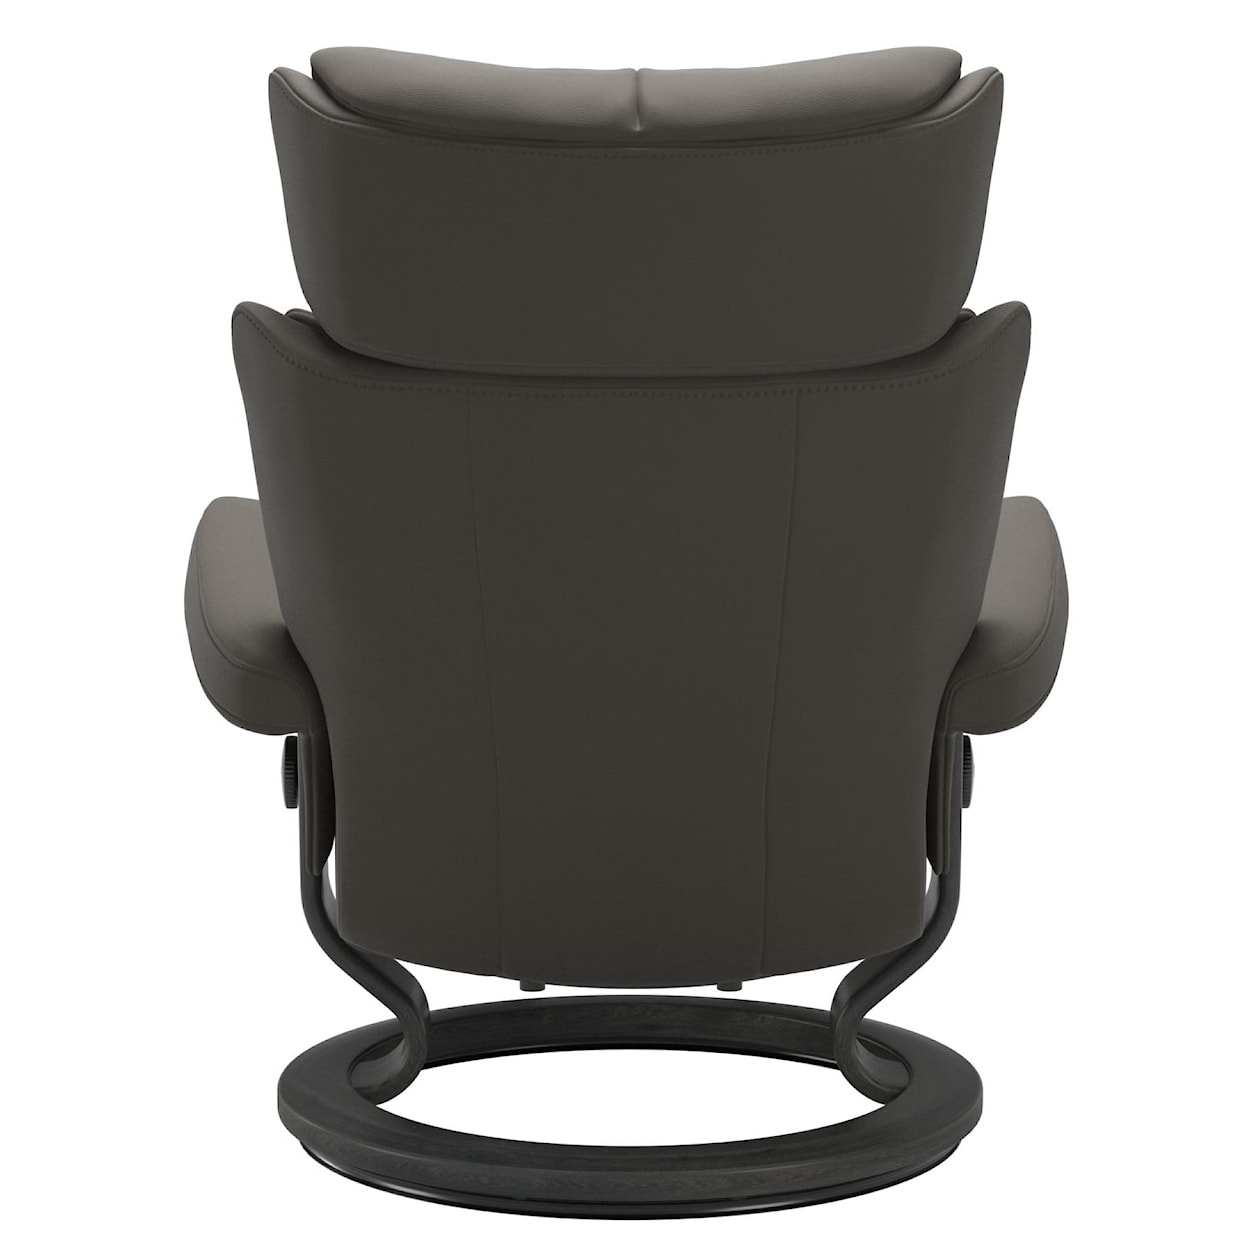 Stressless by Ekornes Magic Chair and Ottoman